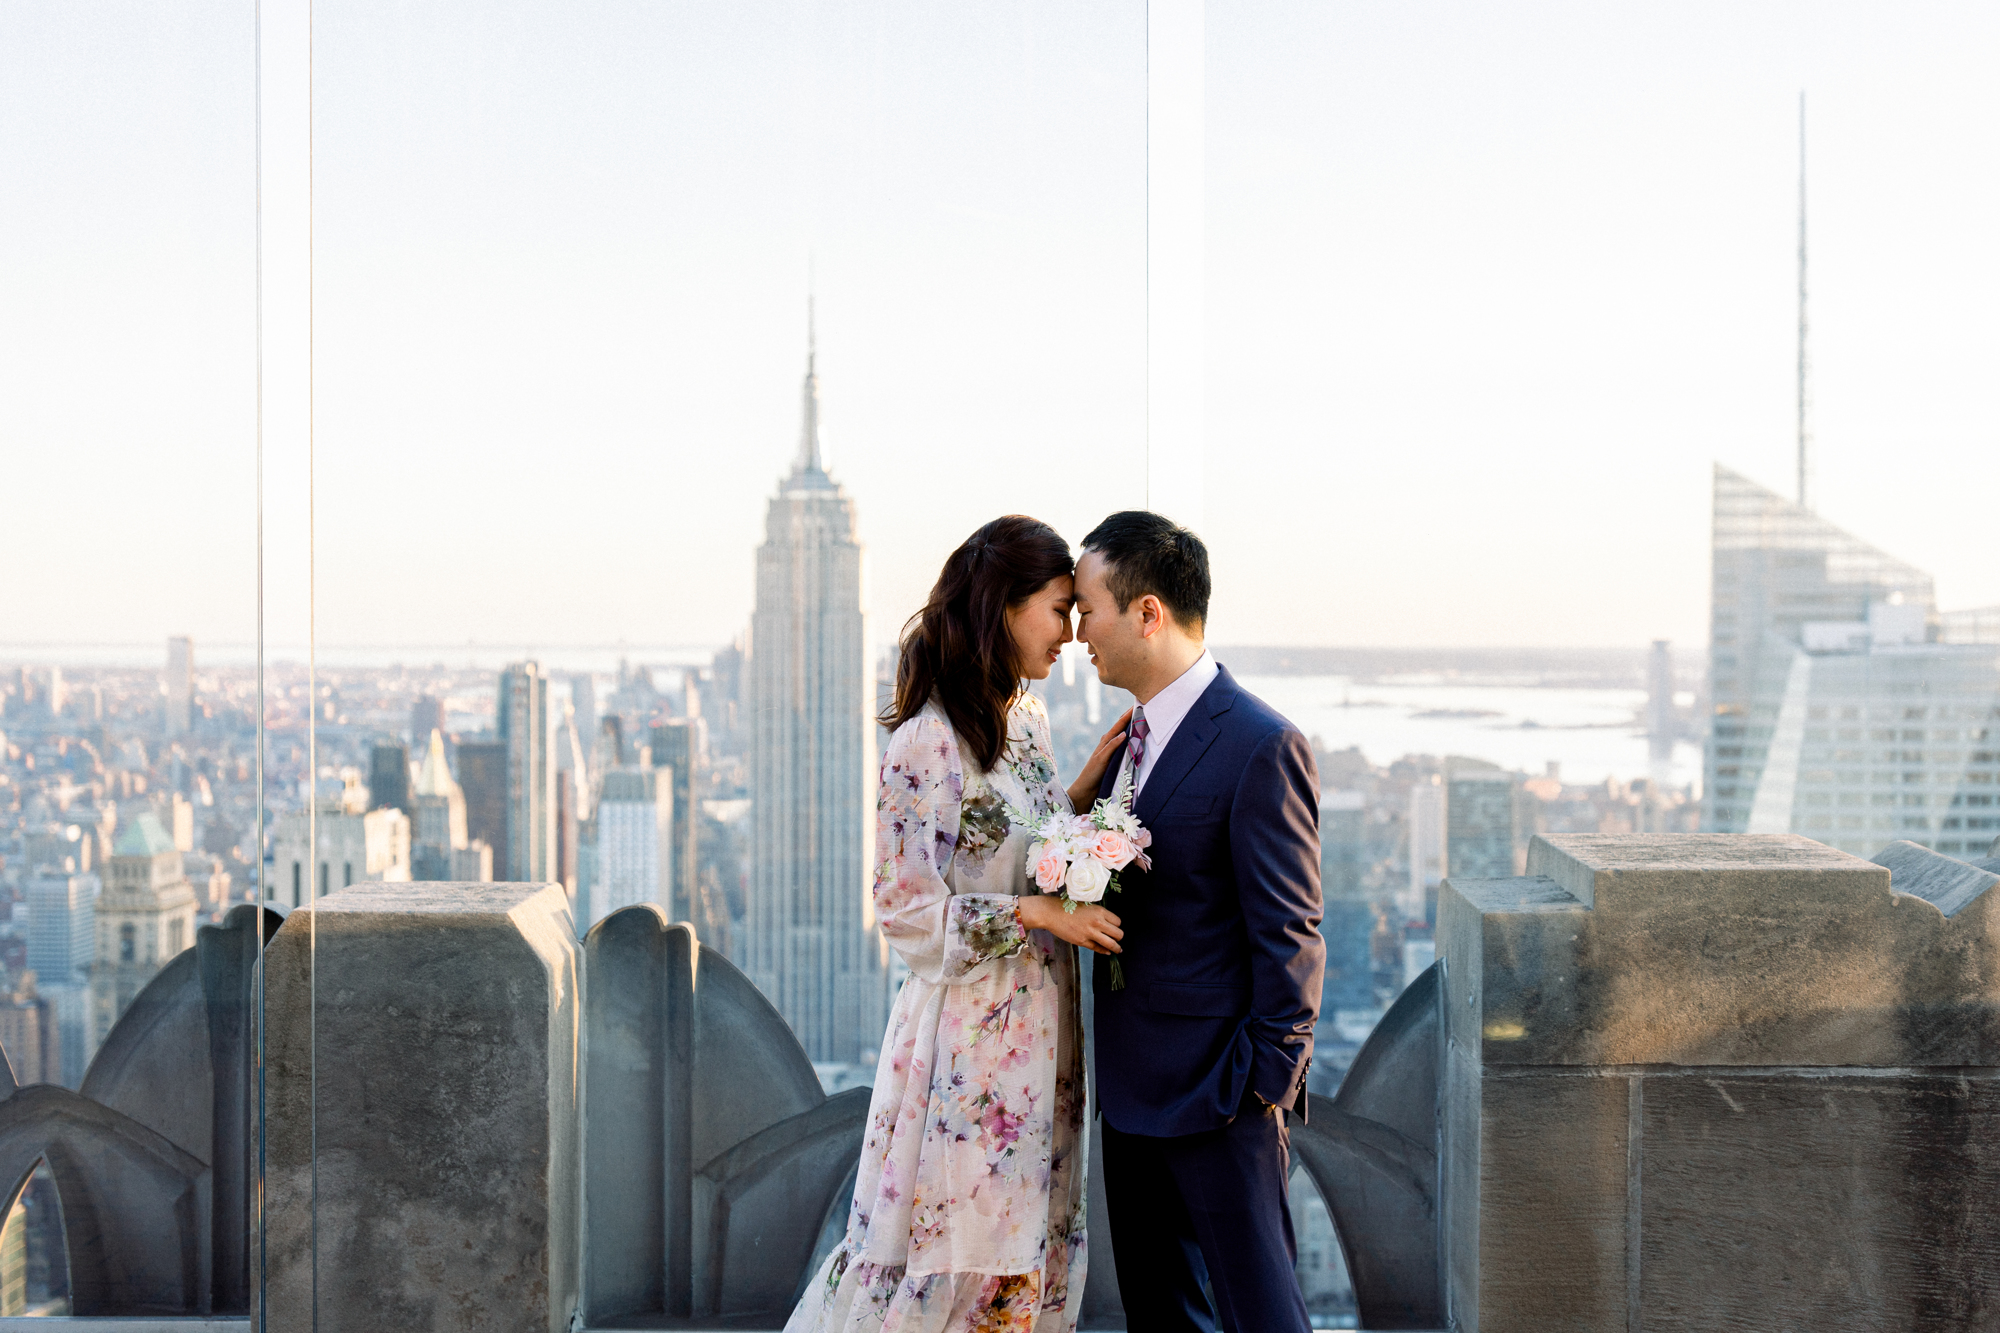 Idyllic Top of the Rock Engagement Photography at Sunset in NYC